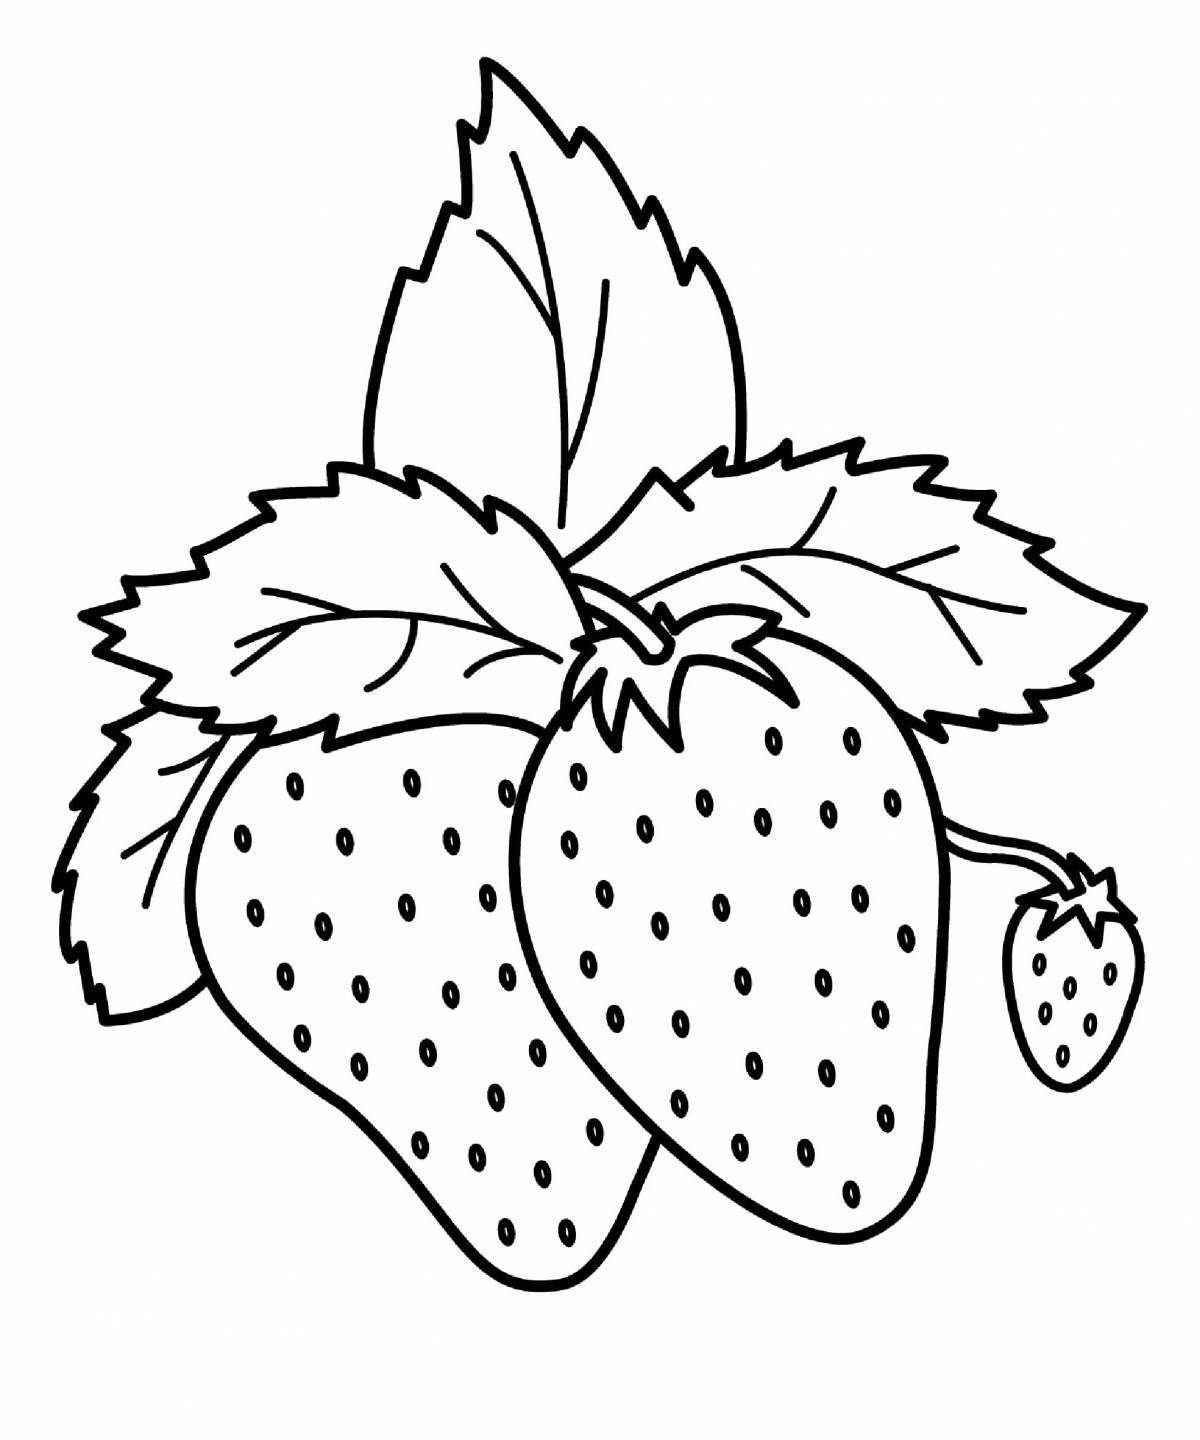 Trendy coloring pages with berries and fruits for kids